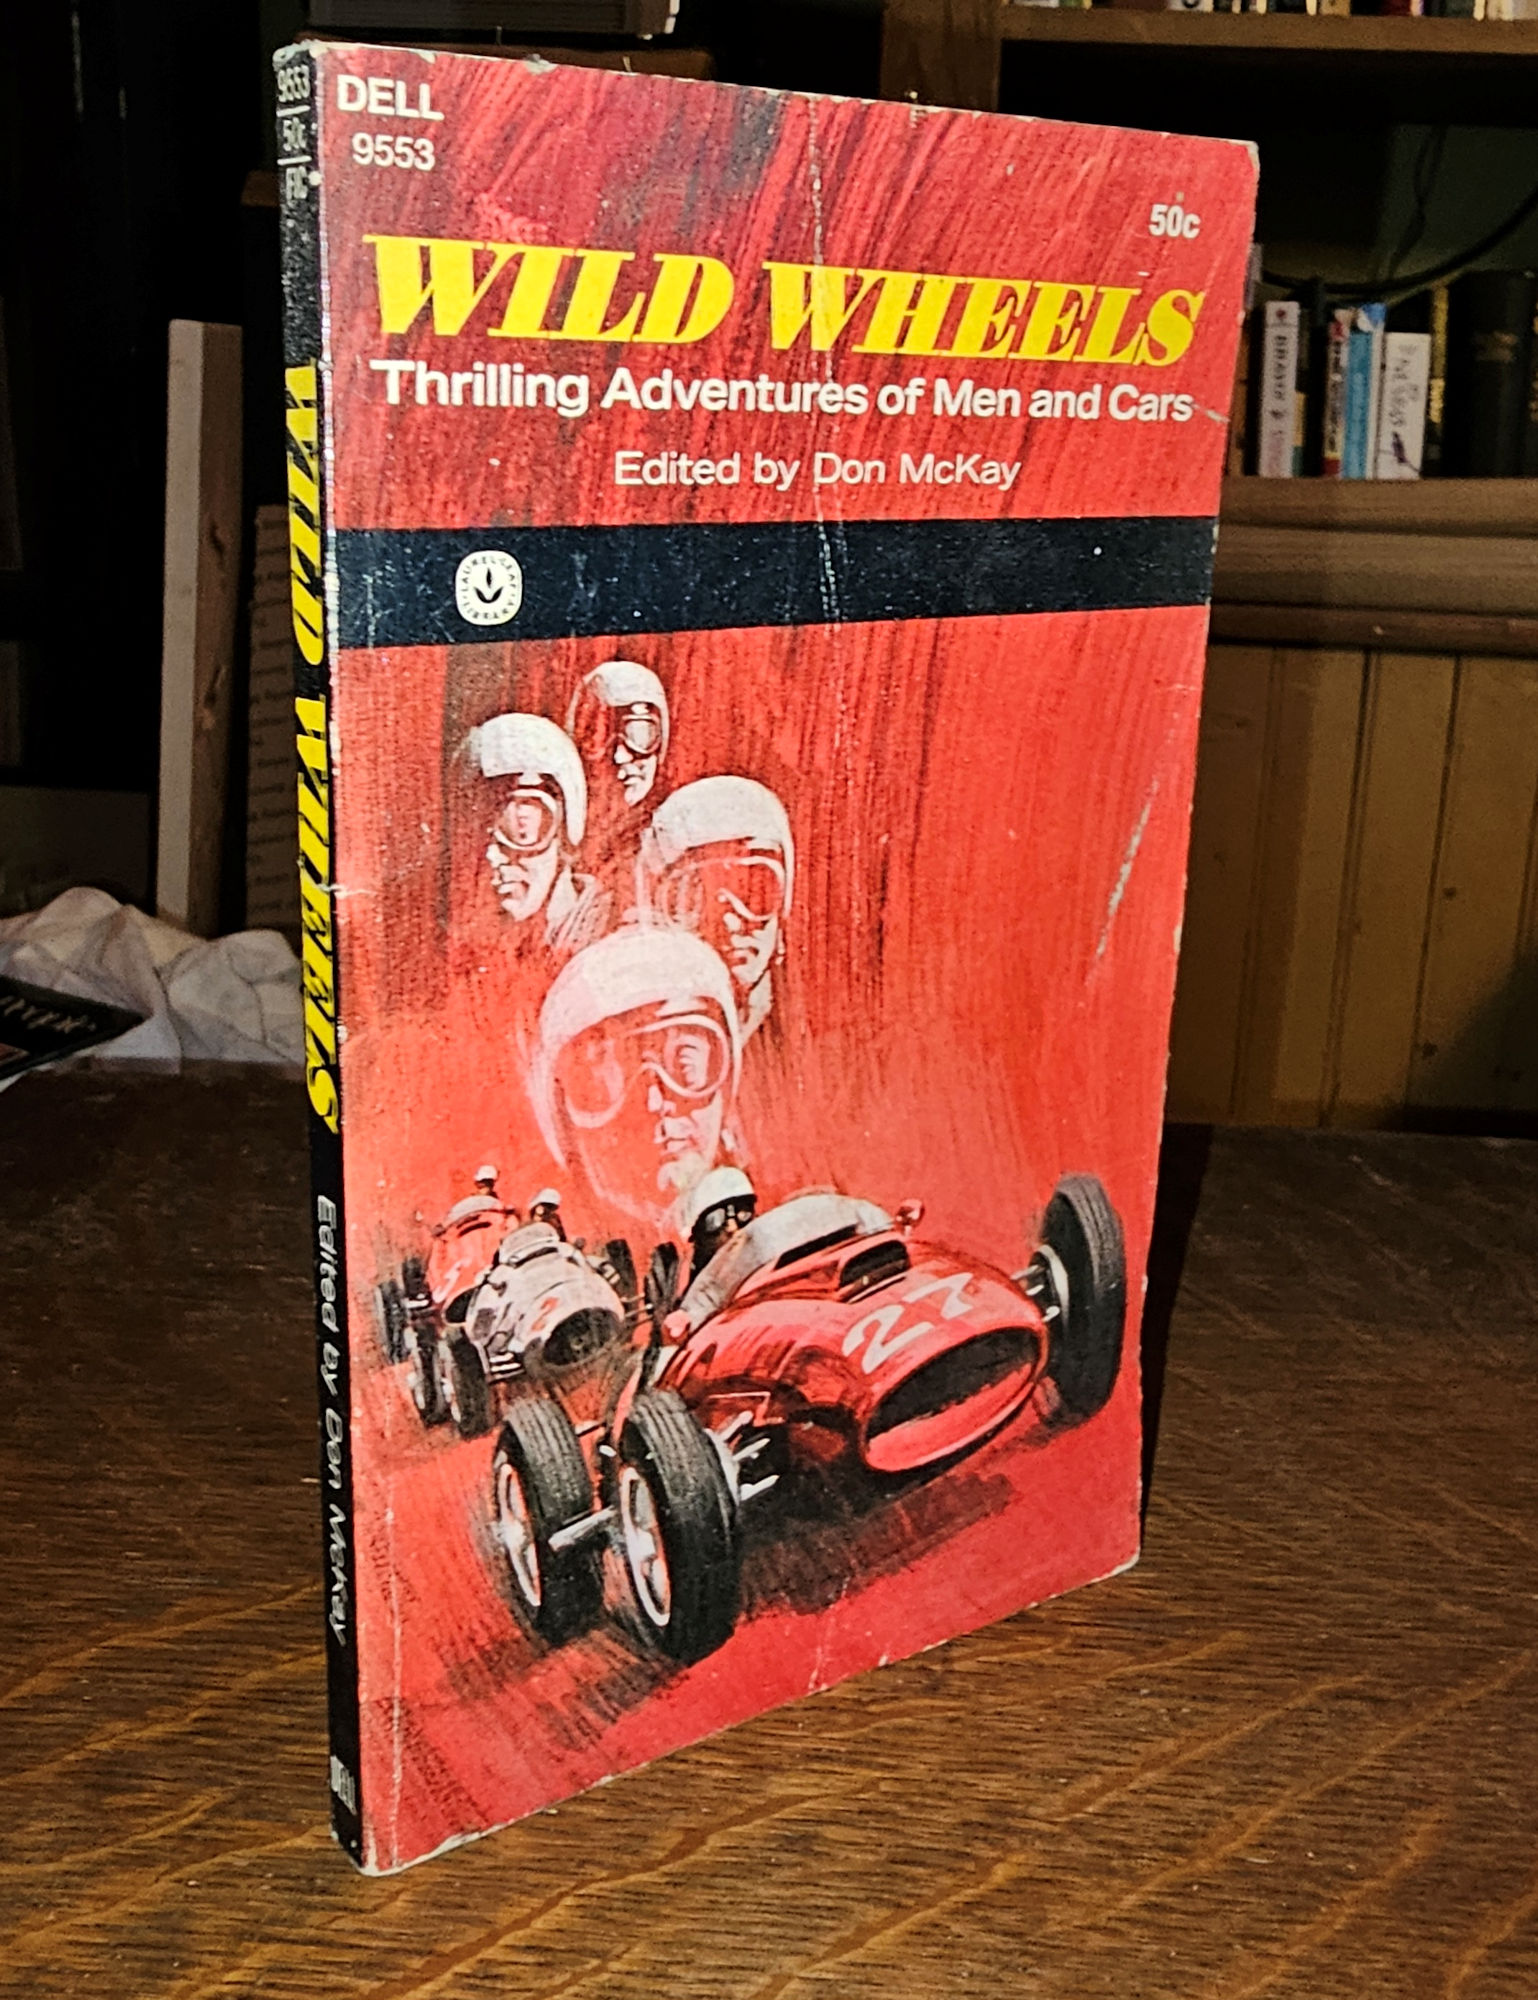 Wild wheels: Thrilling adventures of men
                        and cars 1969 Don McKay